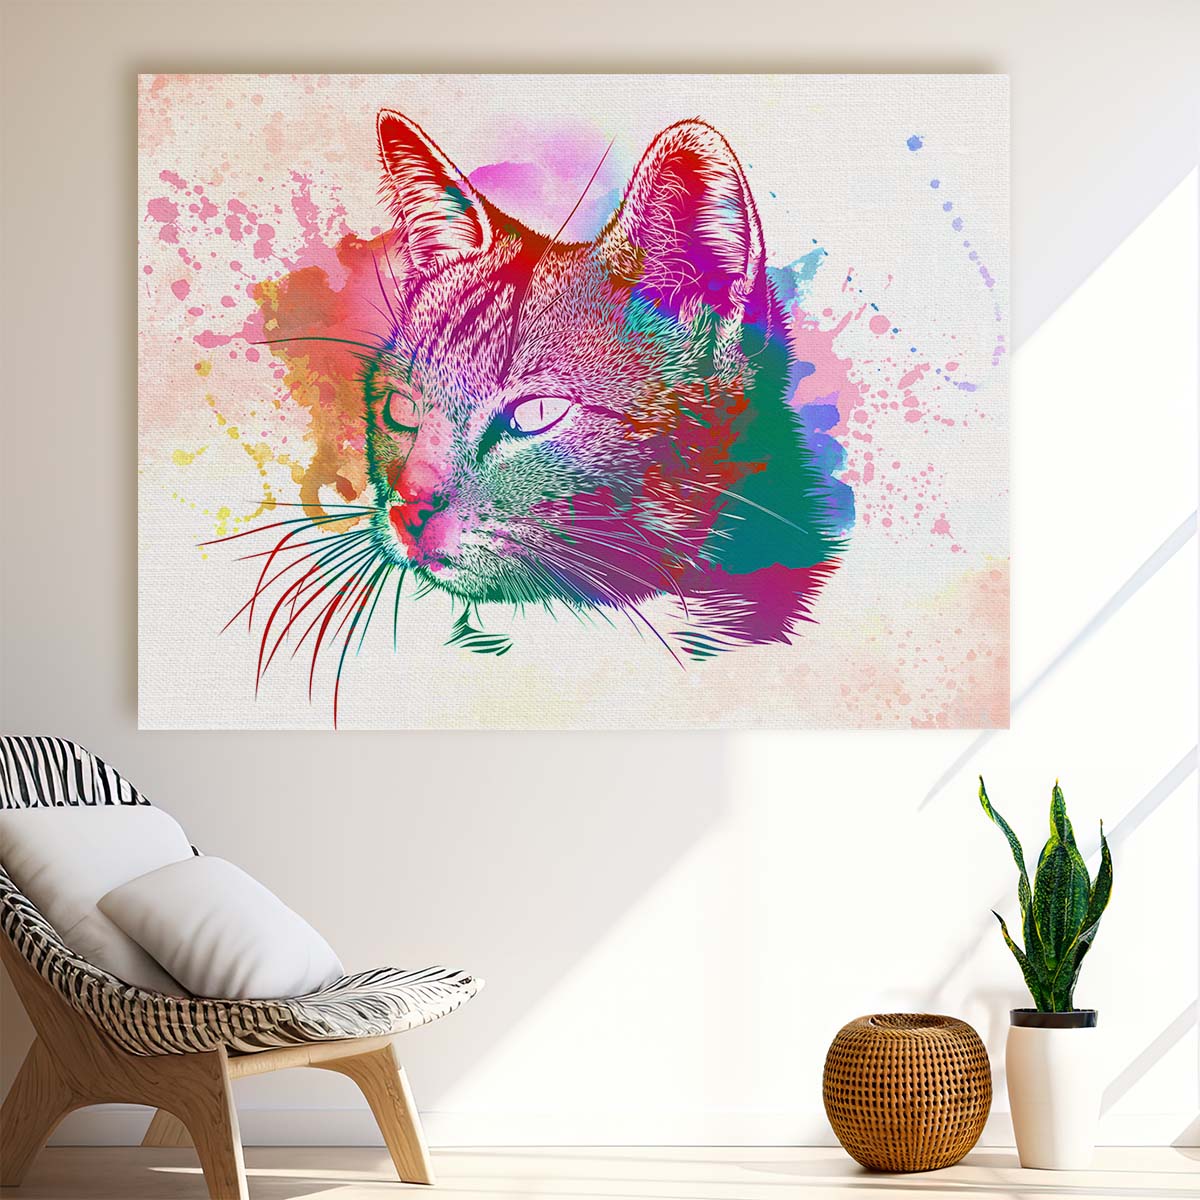 Cat Watercolor Painting Wall Art by Luxuriance Designs. Made in USA.